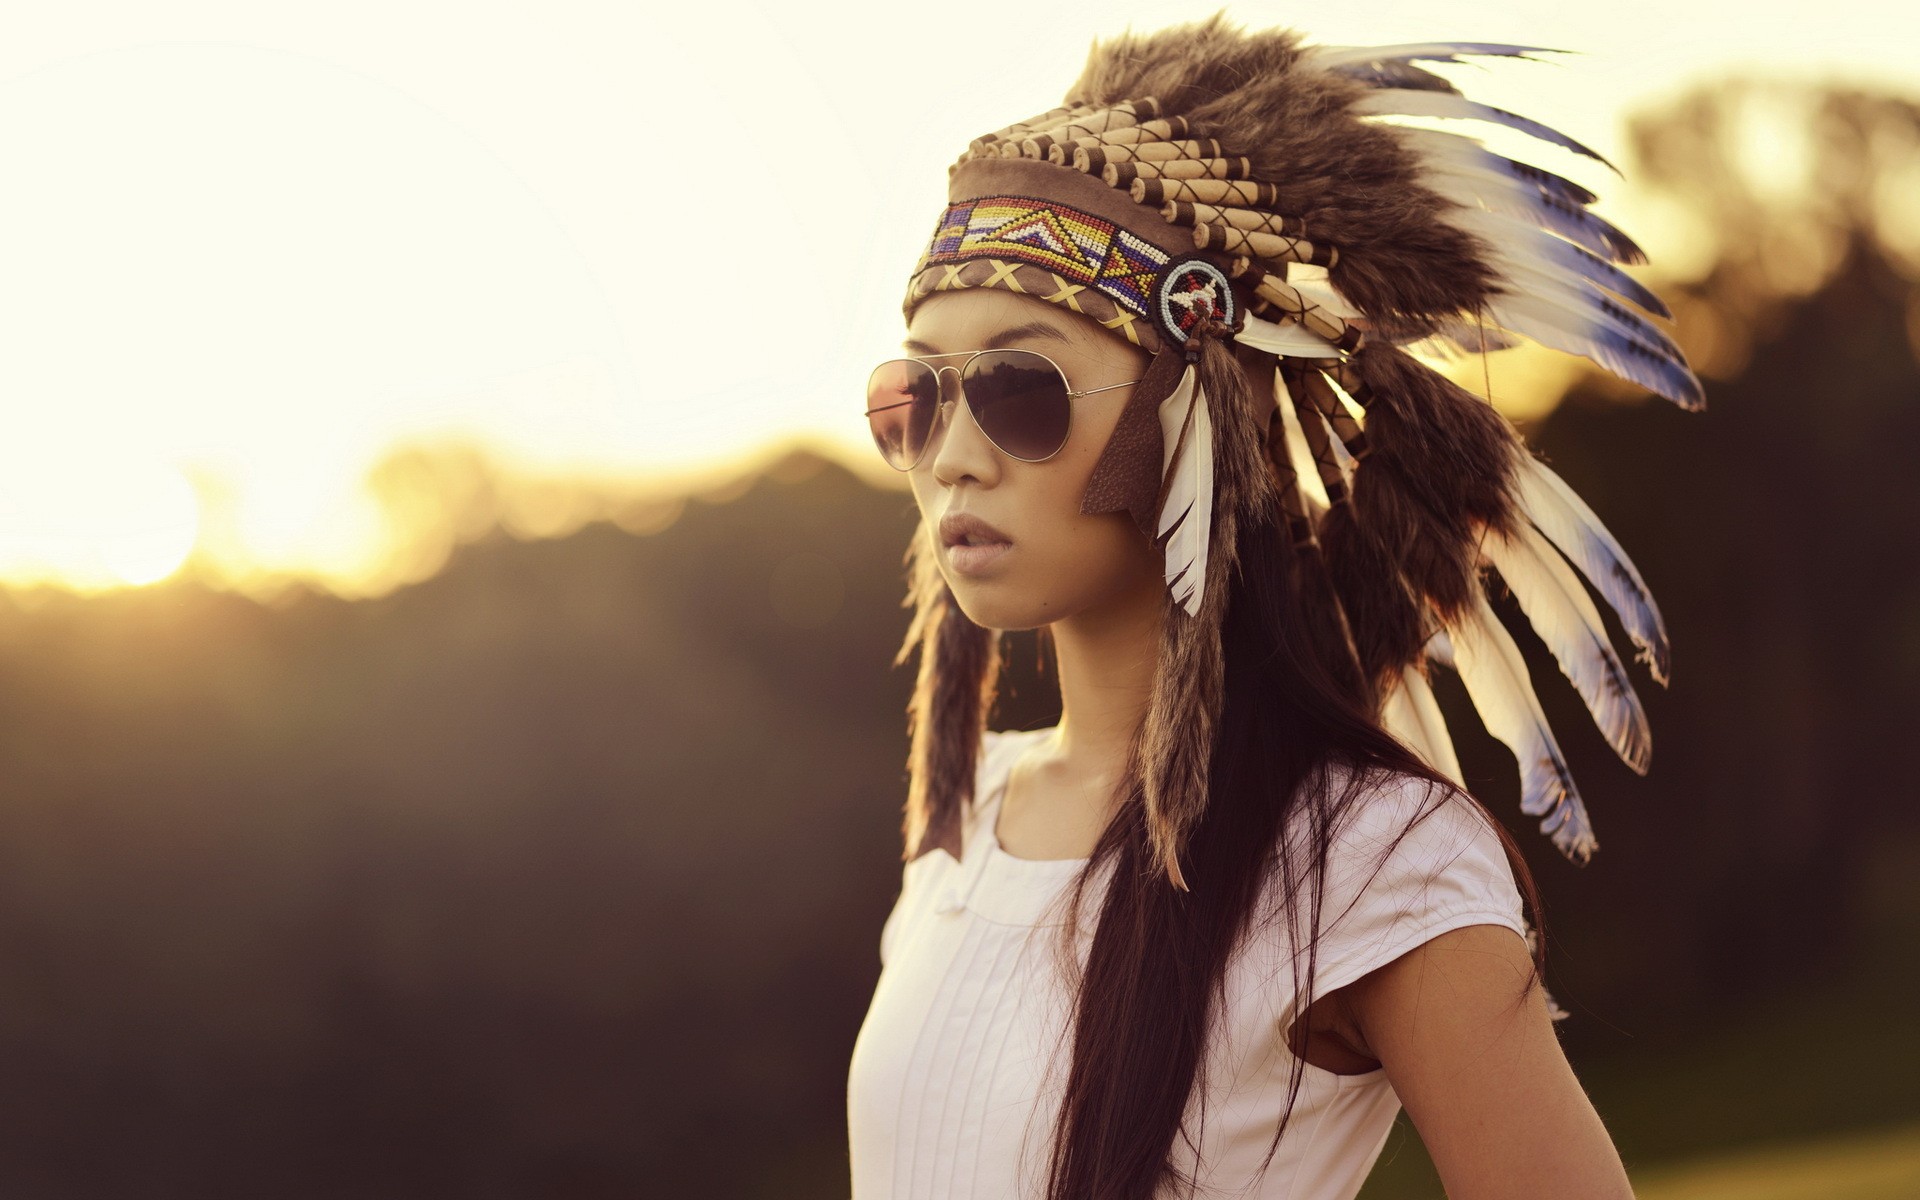 People 1920x1200 feathers brunette white clothing Asian headdress women model sunglasses women with shades women outdoors